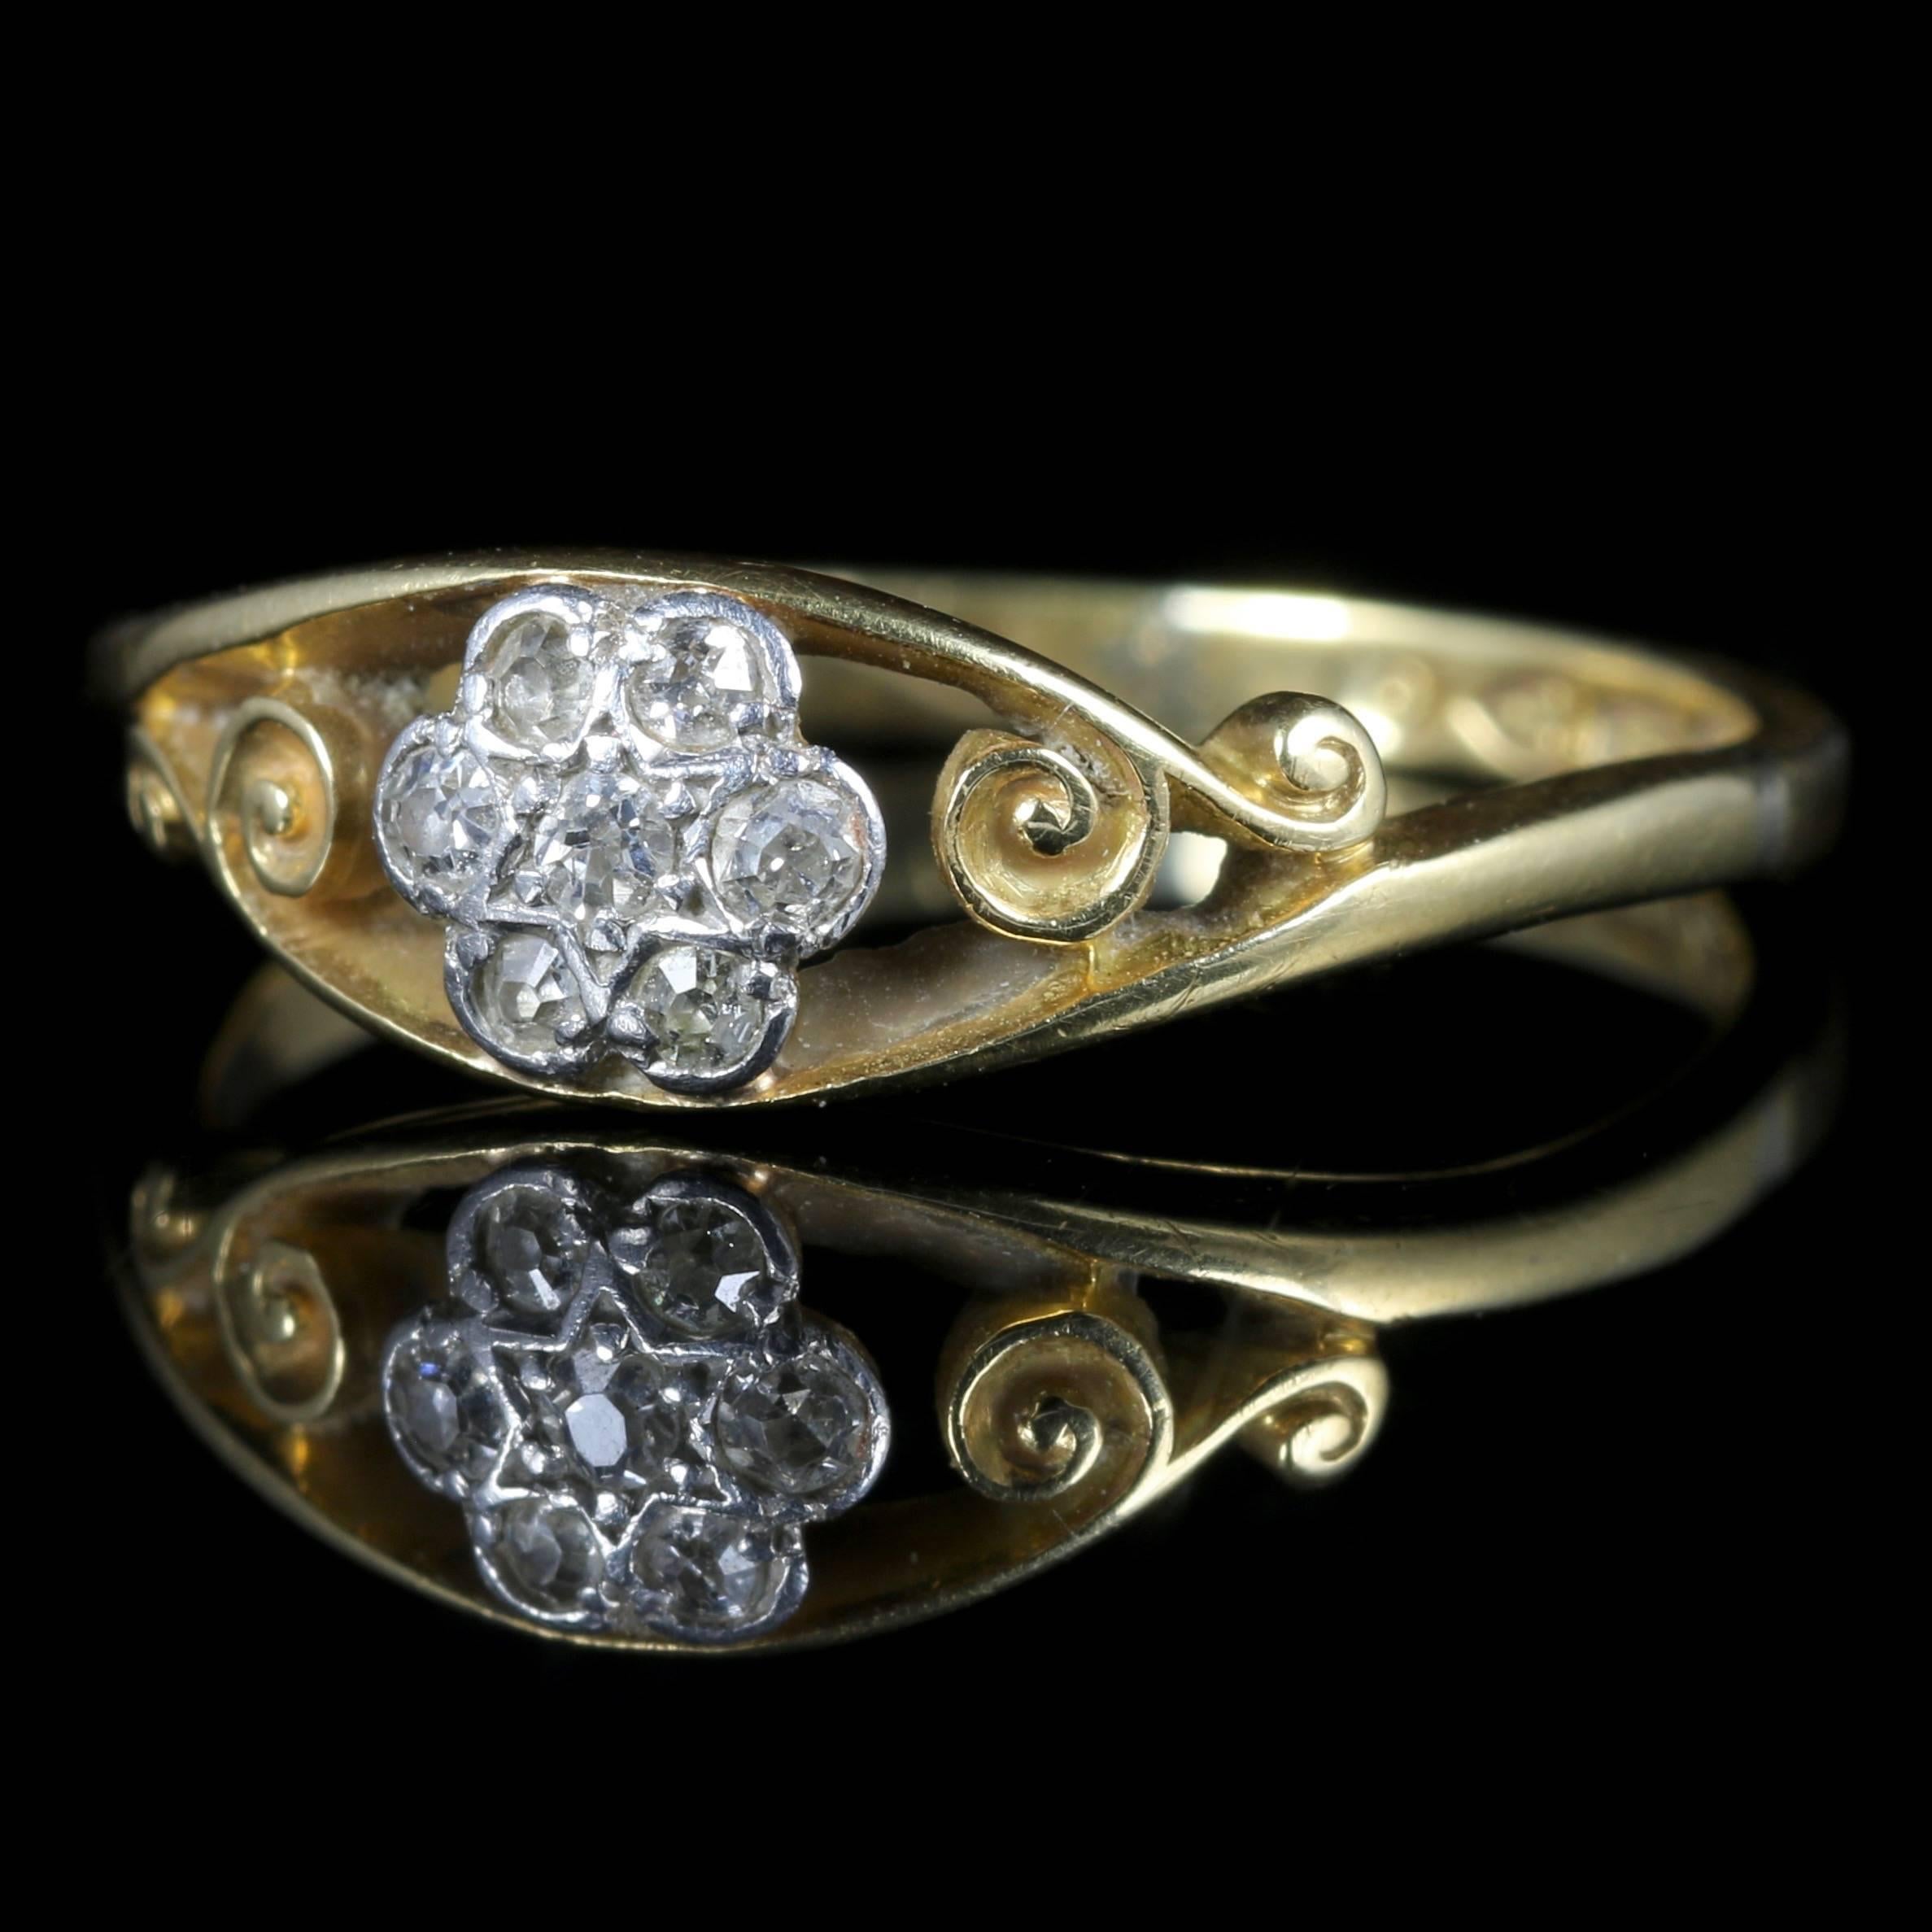 For more details please click continue reading down below...

This fabulous 18ct Gold and Platinum Diamond cluster ring is Circa 1915.

Set with a gorgeous Diamond cluster in a beautiful Gold detailed twist gallery. 

Diamonds sparkle continuously